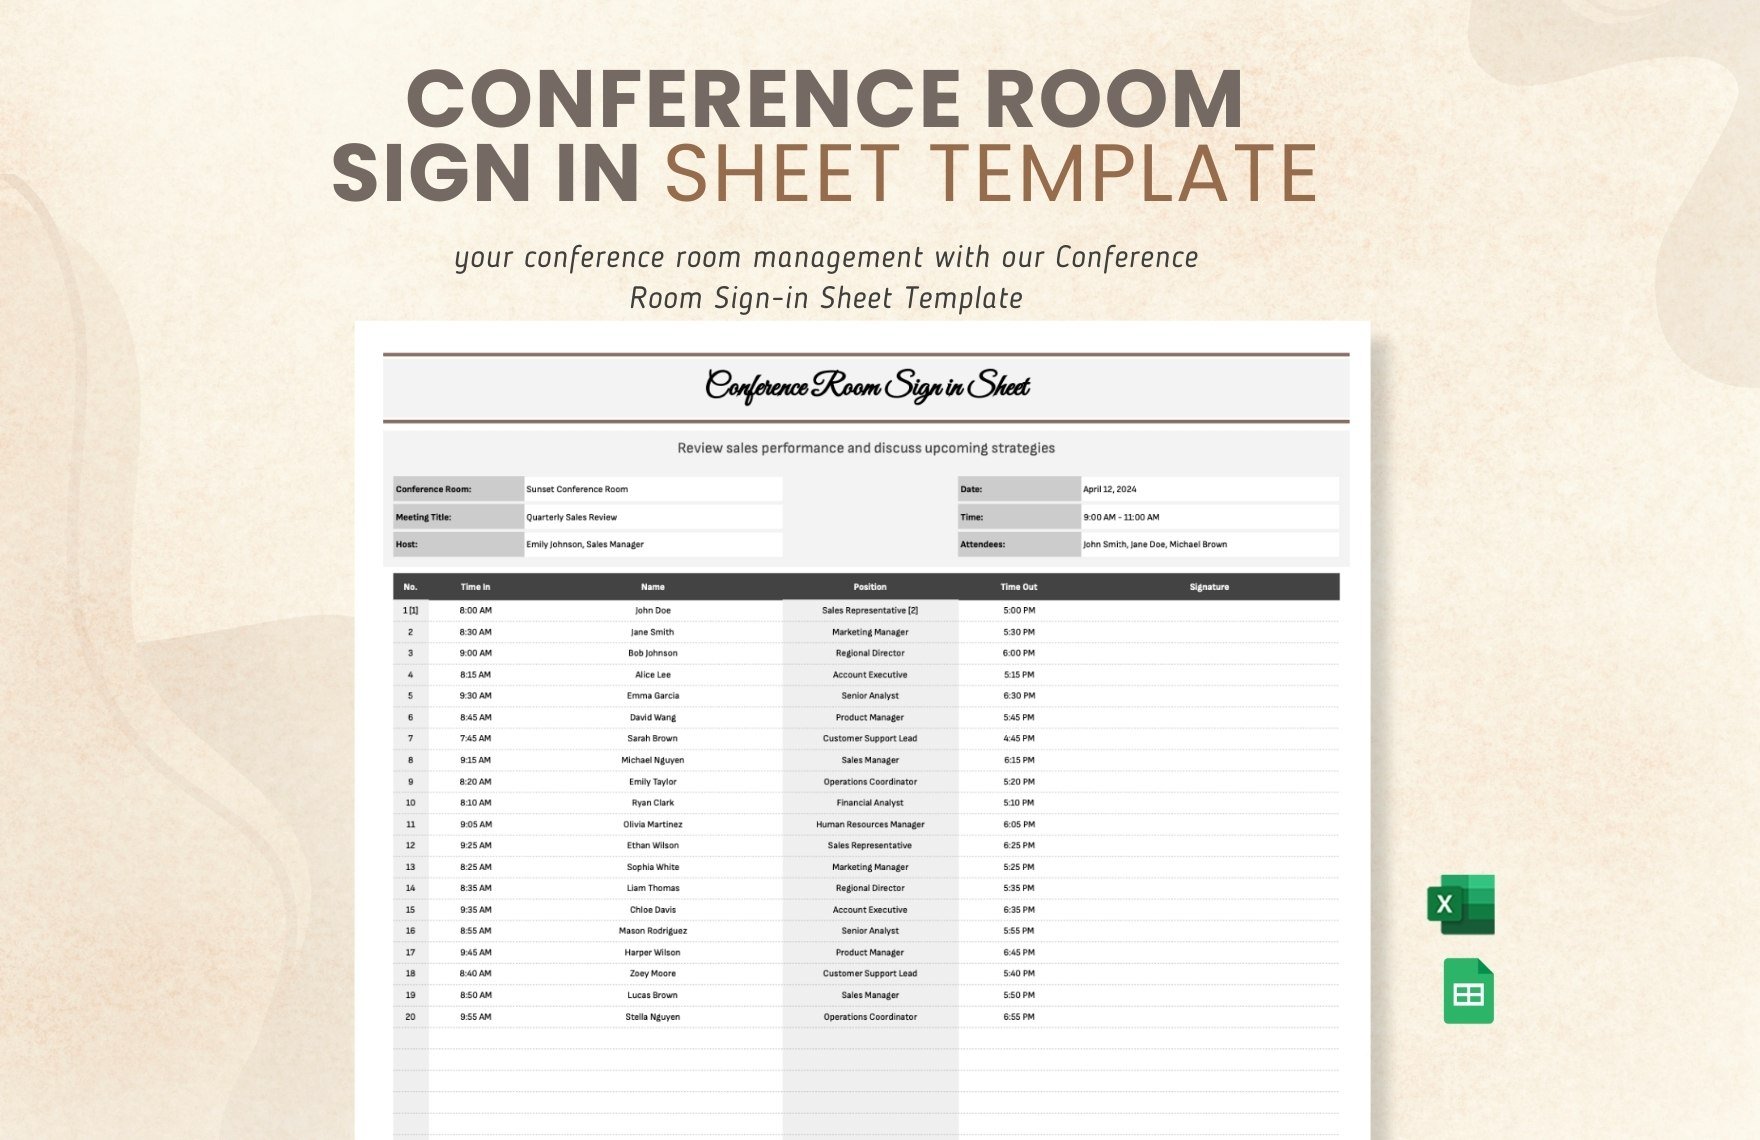 Conference Room Sign in Sheet Template in Excel, Google Sheets